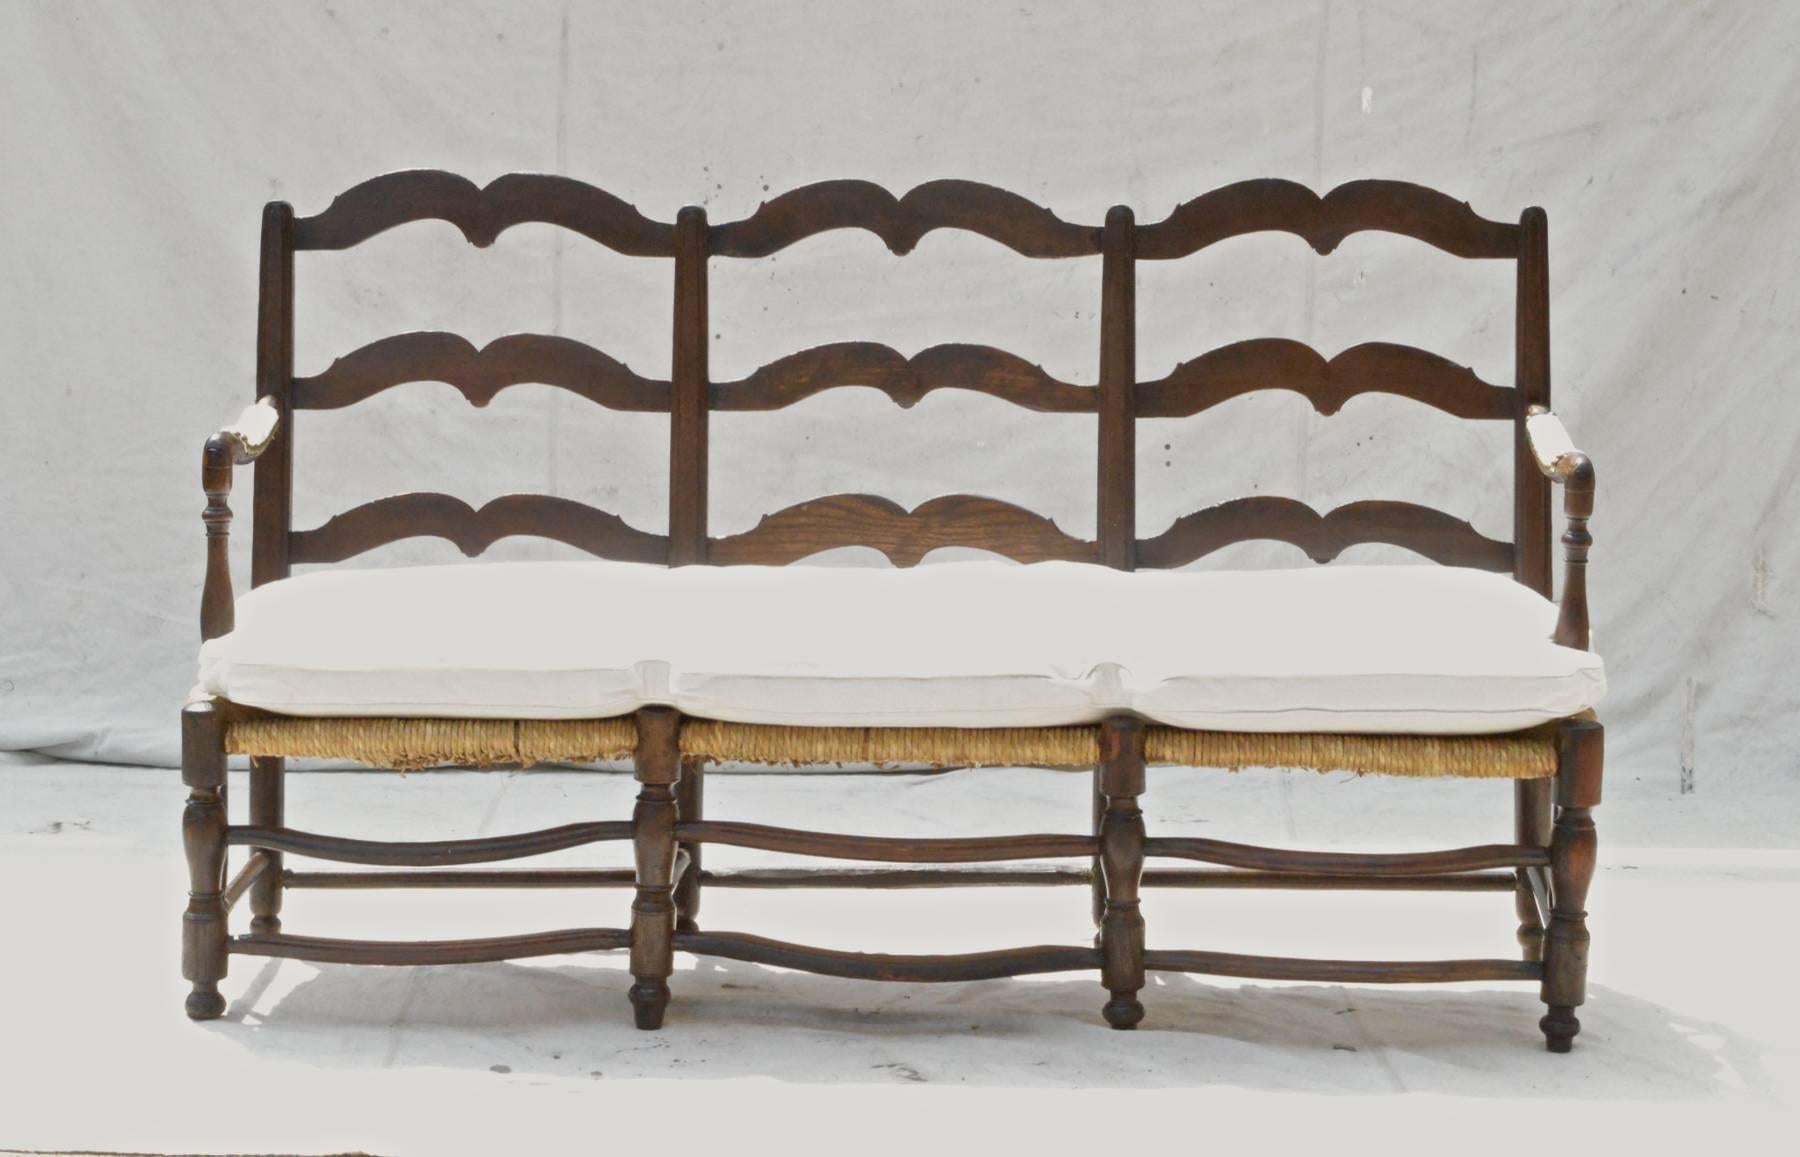 A stylish French Provincial triple back bench in oak. The mid-19th century settee has carved mustache formed back splats, unusual down swept arms that have upholstered armrest trimmed in nailhead, a comfortable down cushion that spans the entire